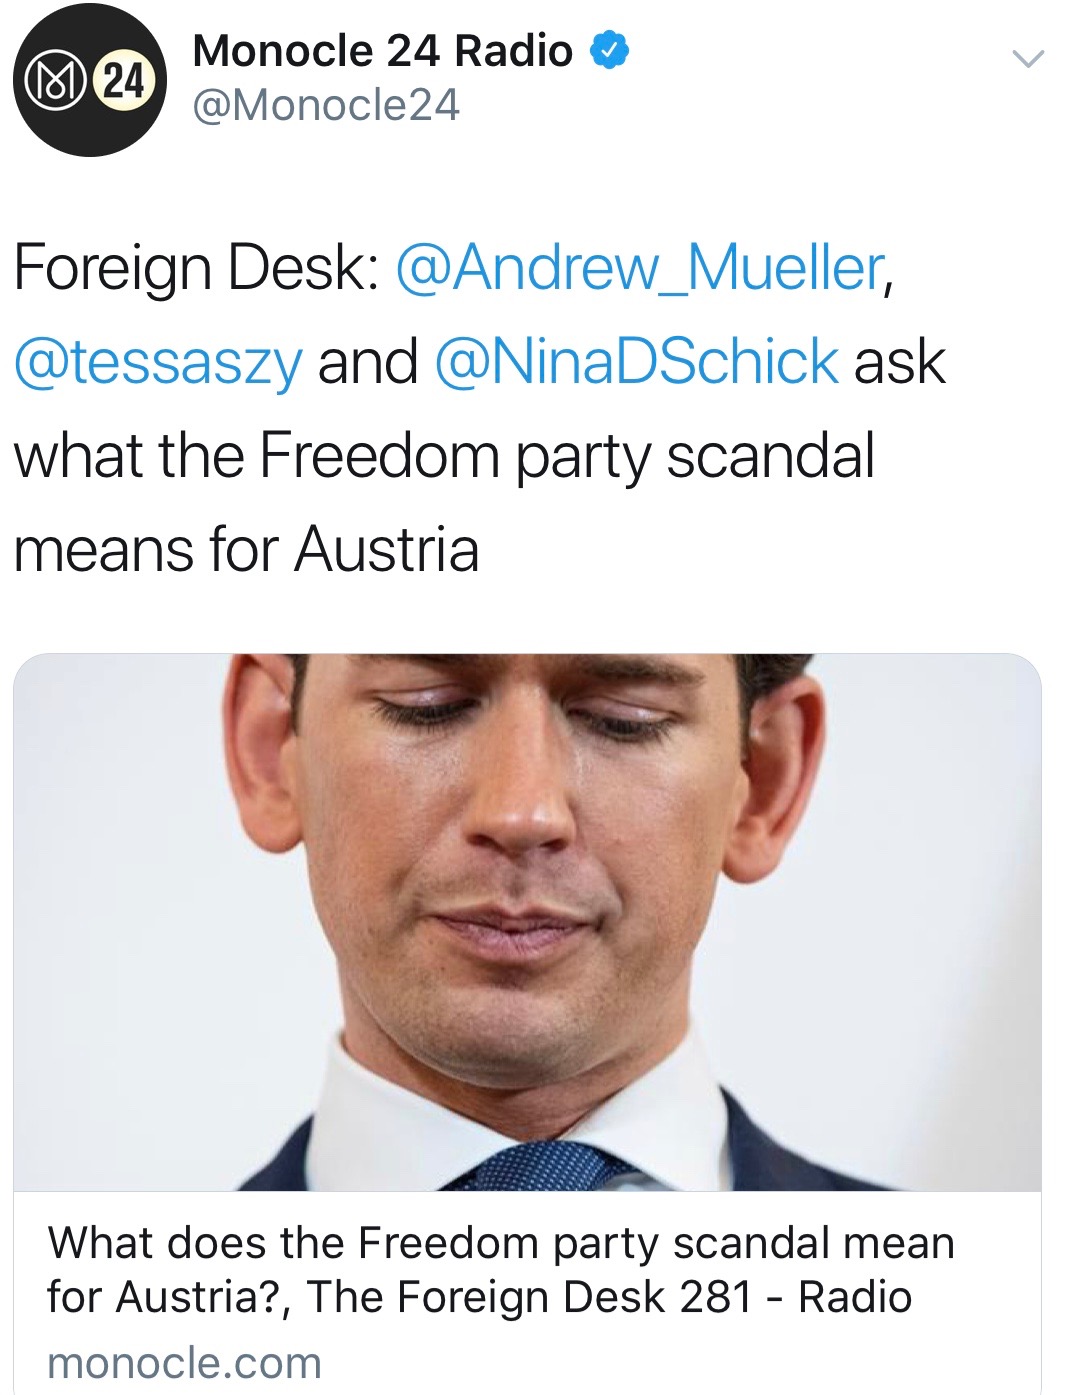 What does the Freedom party scandal mean for Austria?